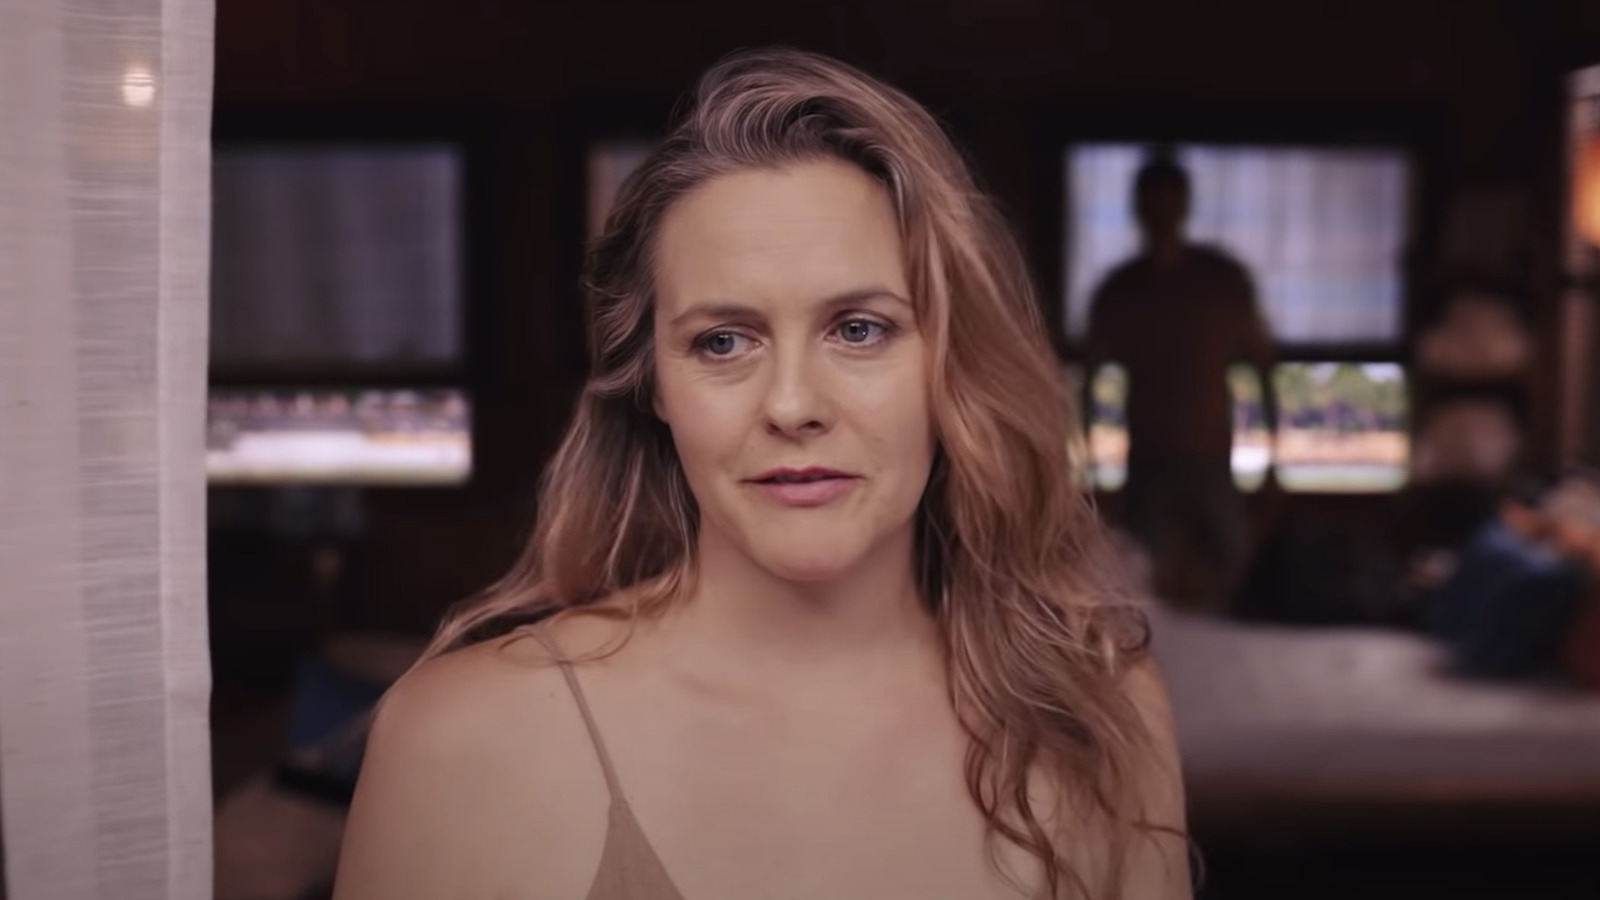 Let's Talk About That Alicia Silverstone Scene in The Lodge